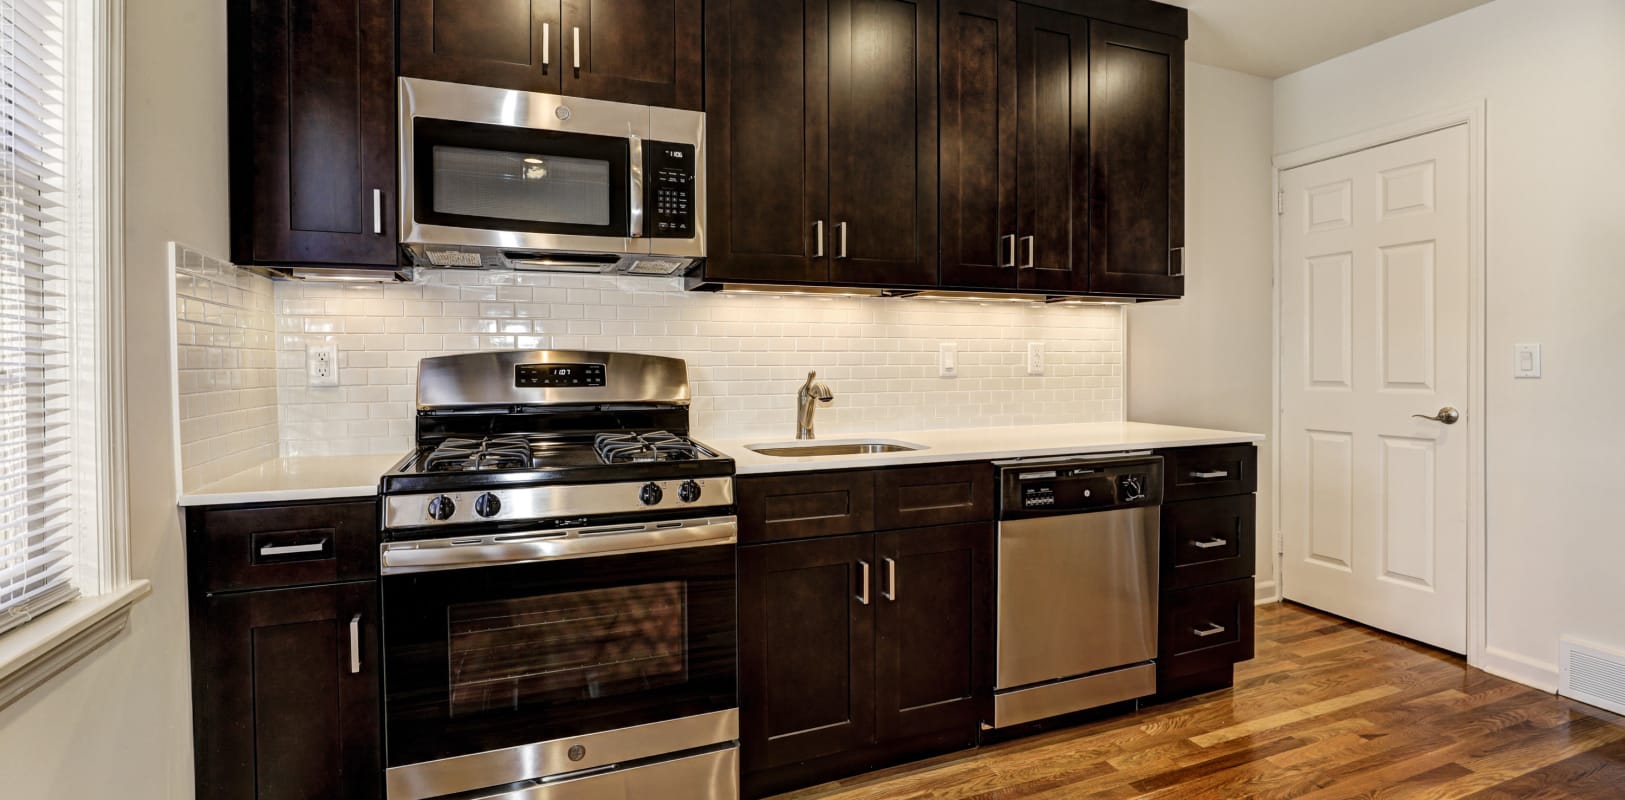 Spacious kitchen with stainless-steel appliances and wood-style flooring at General Wayne Townhomes and Ridgedale Gardens in Madison, New Jersey